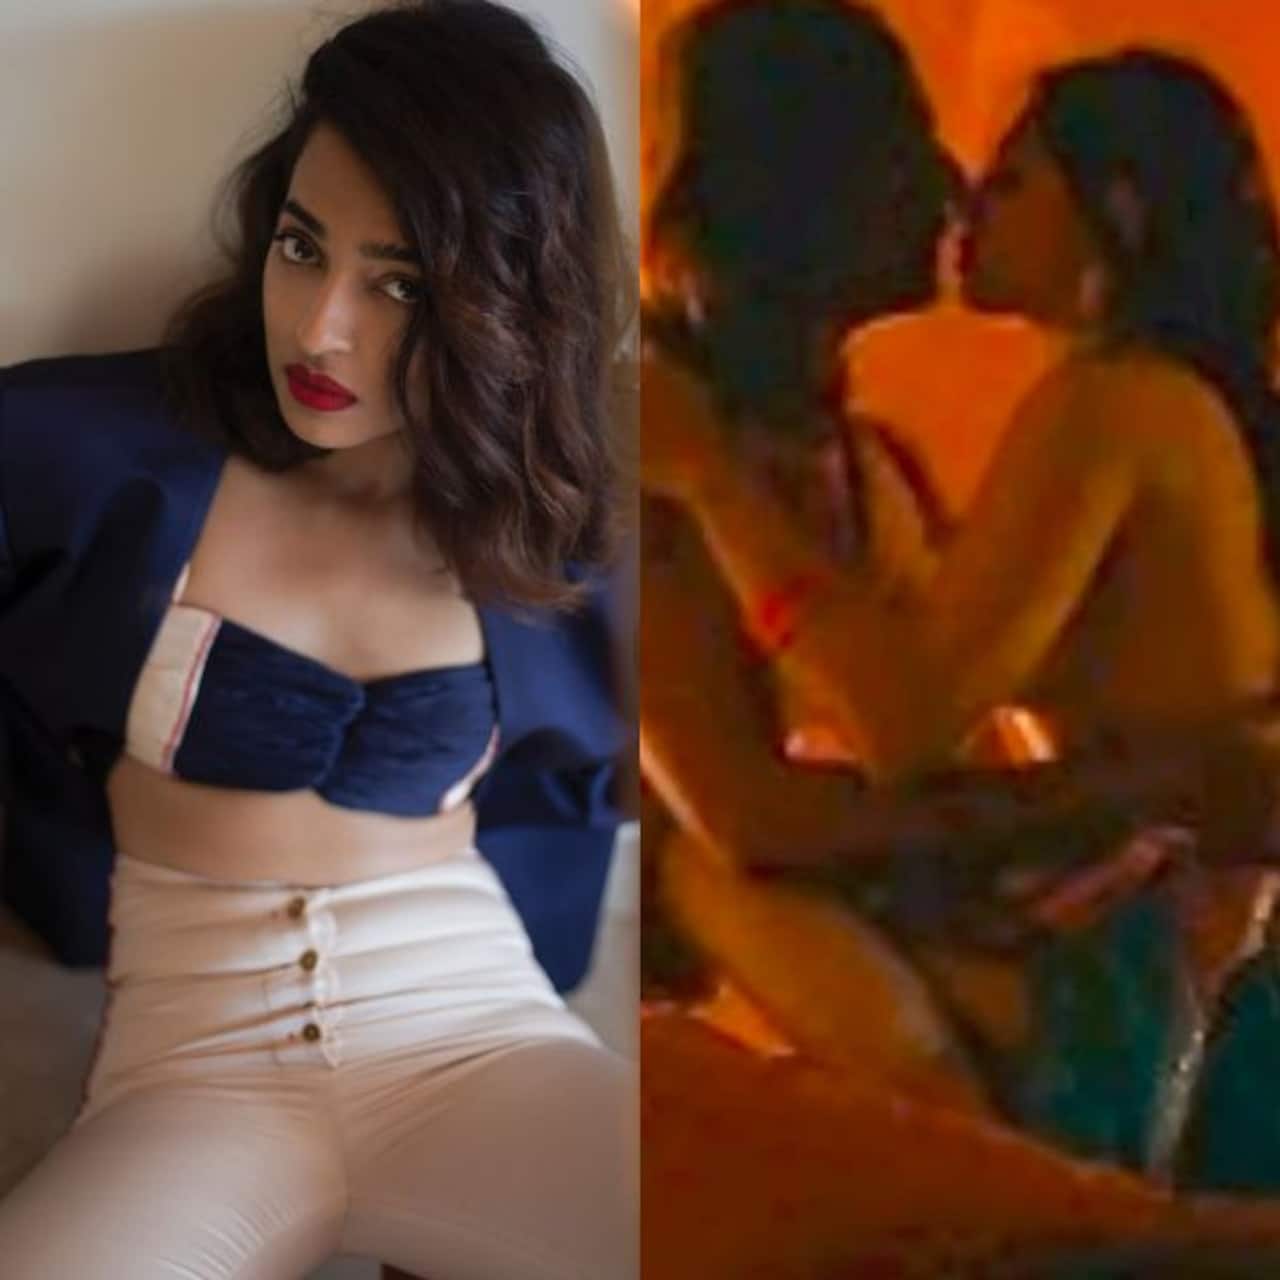 Radhika Apte on her nude clip leak: Couldn’t step out of the house for days because my driver, watchman and others recognised me from the video